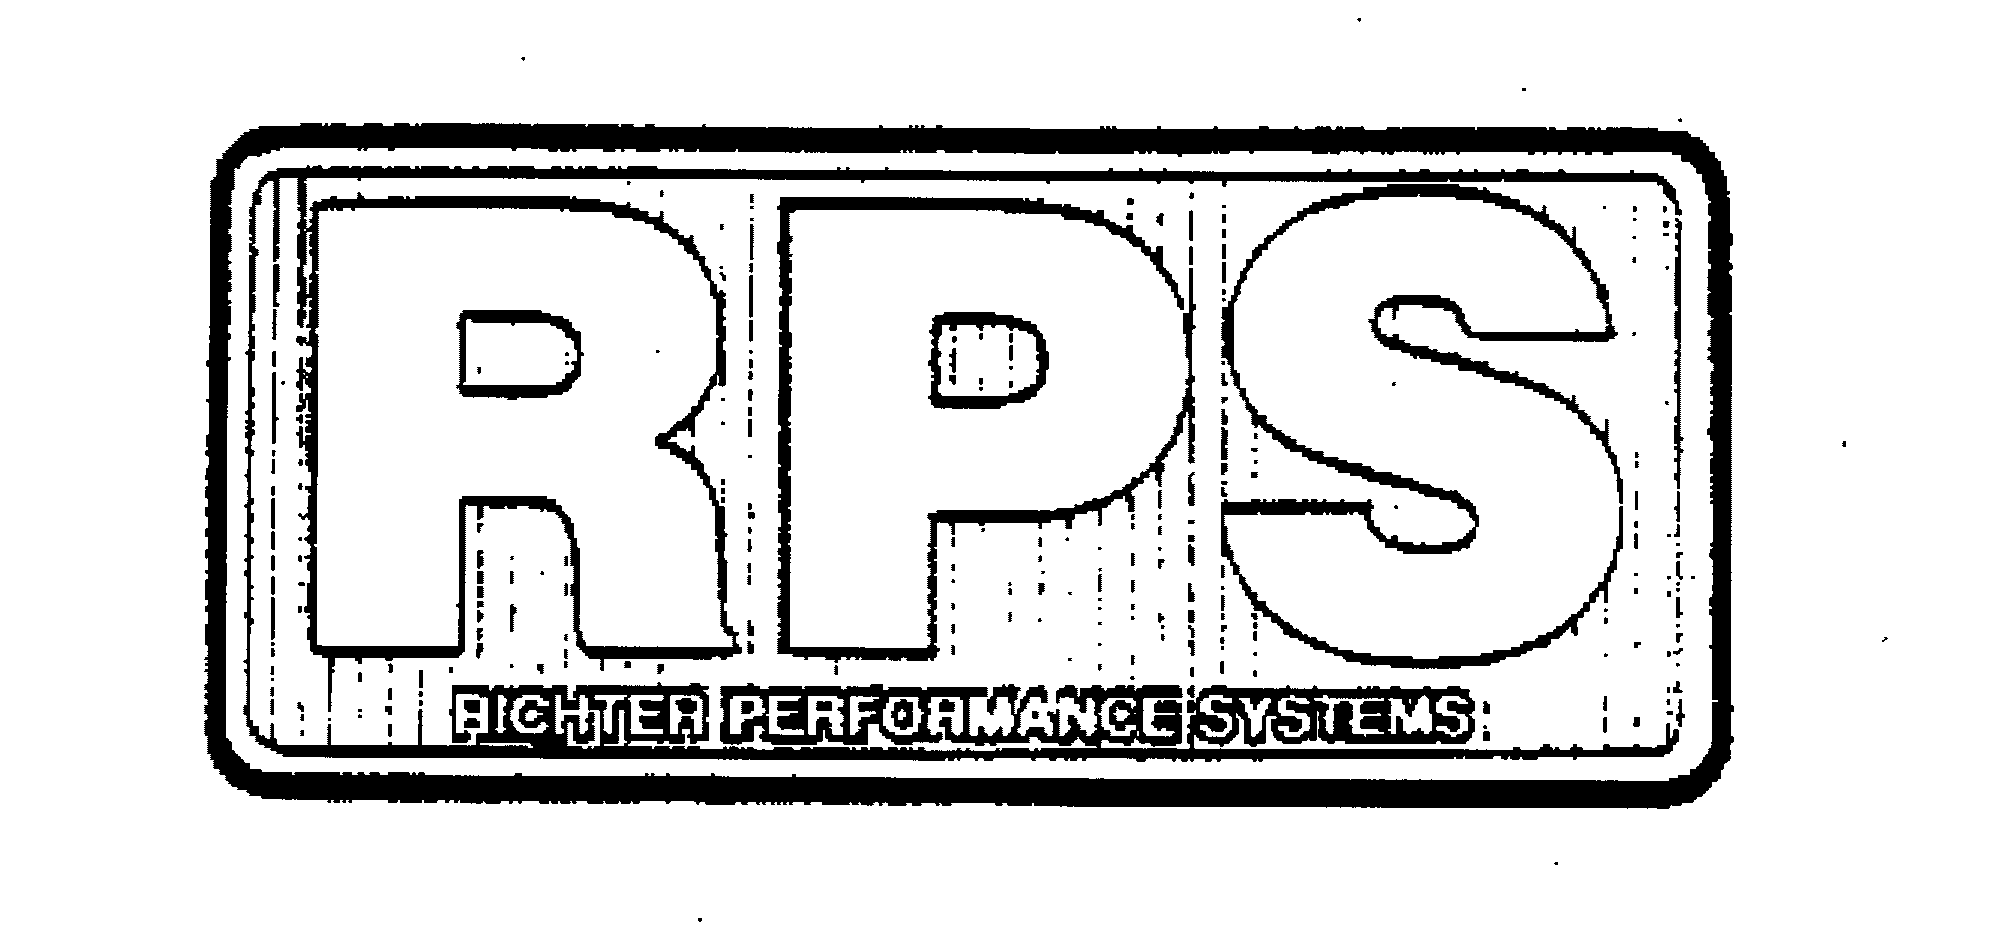  RPS RICHTER PERFORMANCE SYSTEMS